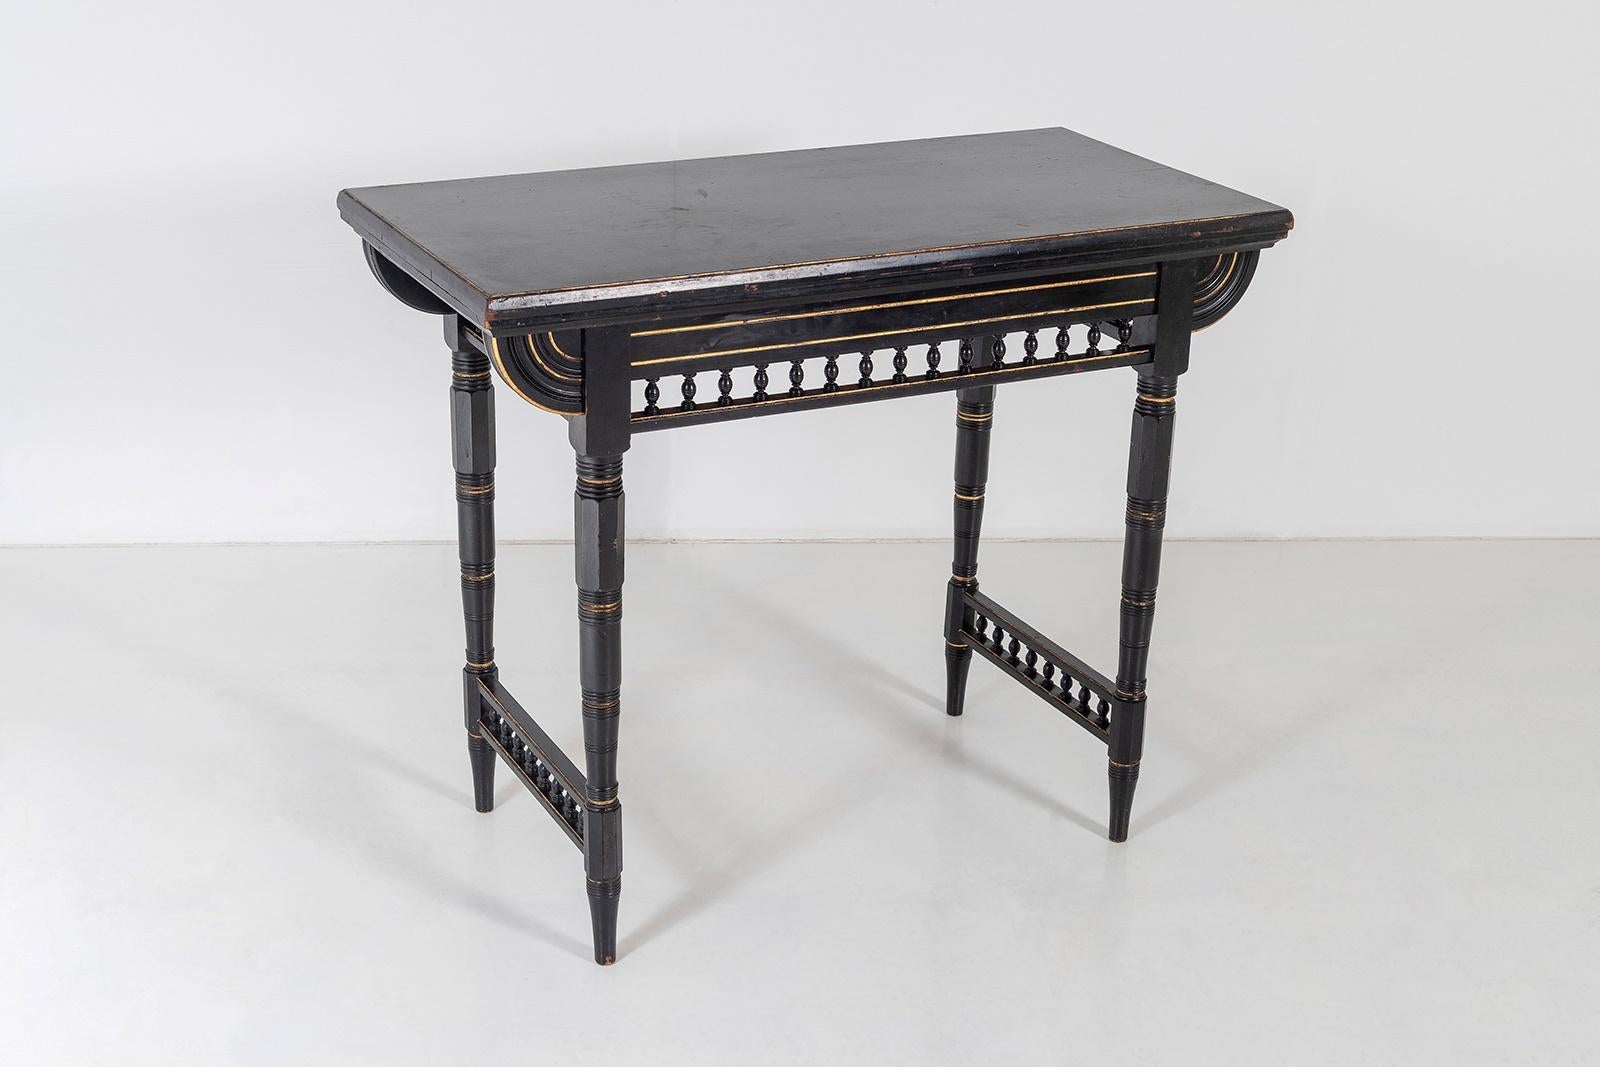 A superb little Aesthetic Movement Card Table that also makes a perfect Console Table.  In black mahogany ebonised and gilt finish with it original red baize inset top.
This piece contains so many wonderful detailing, the gallery border detail is